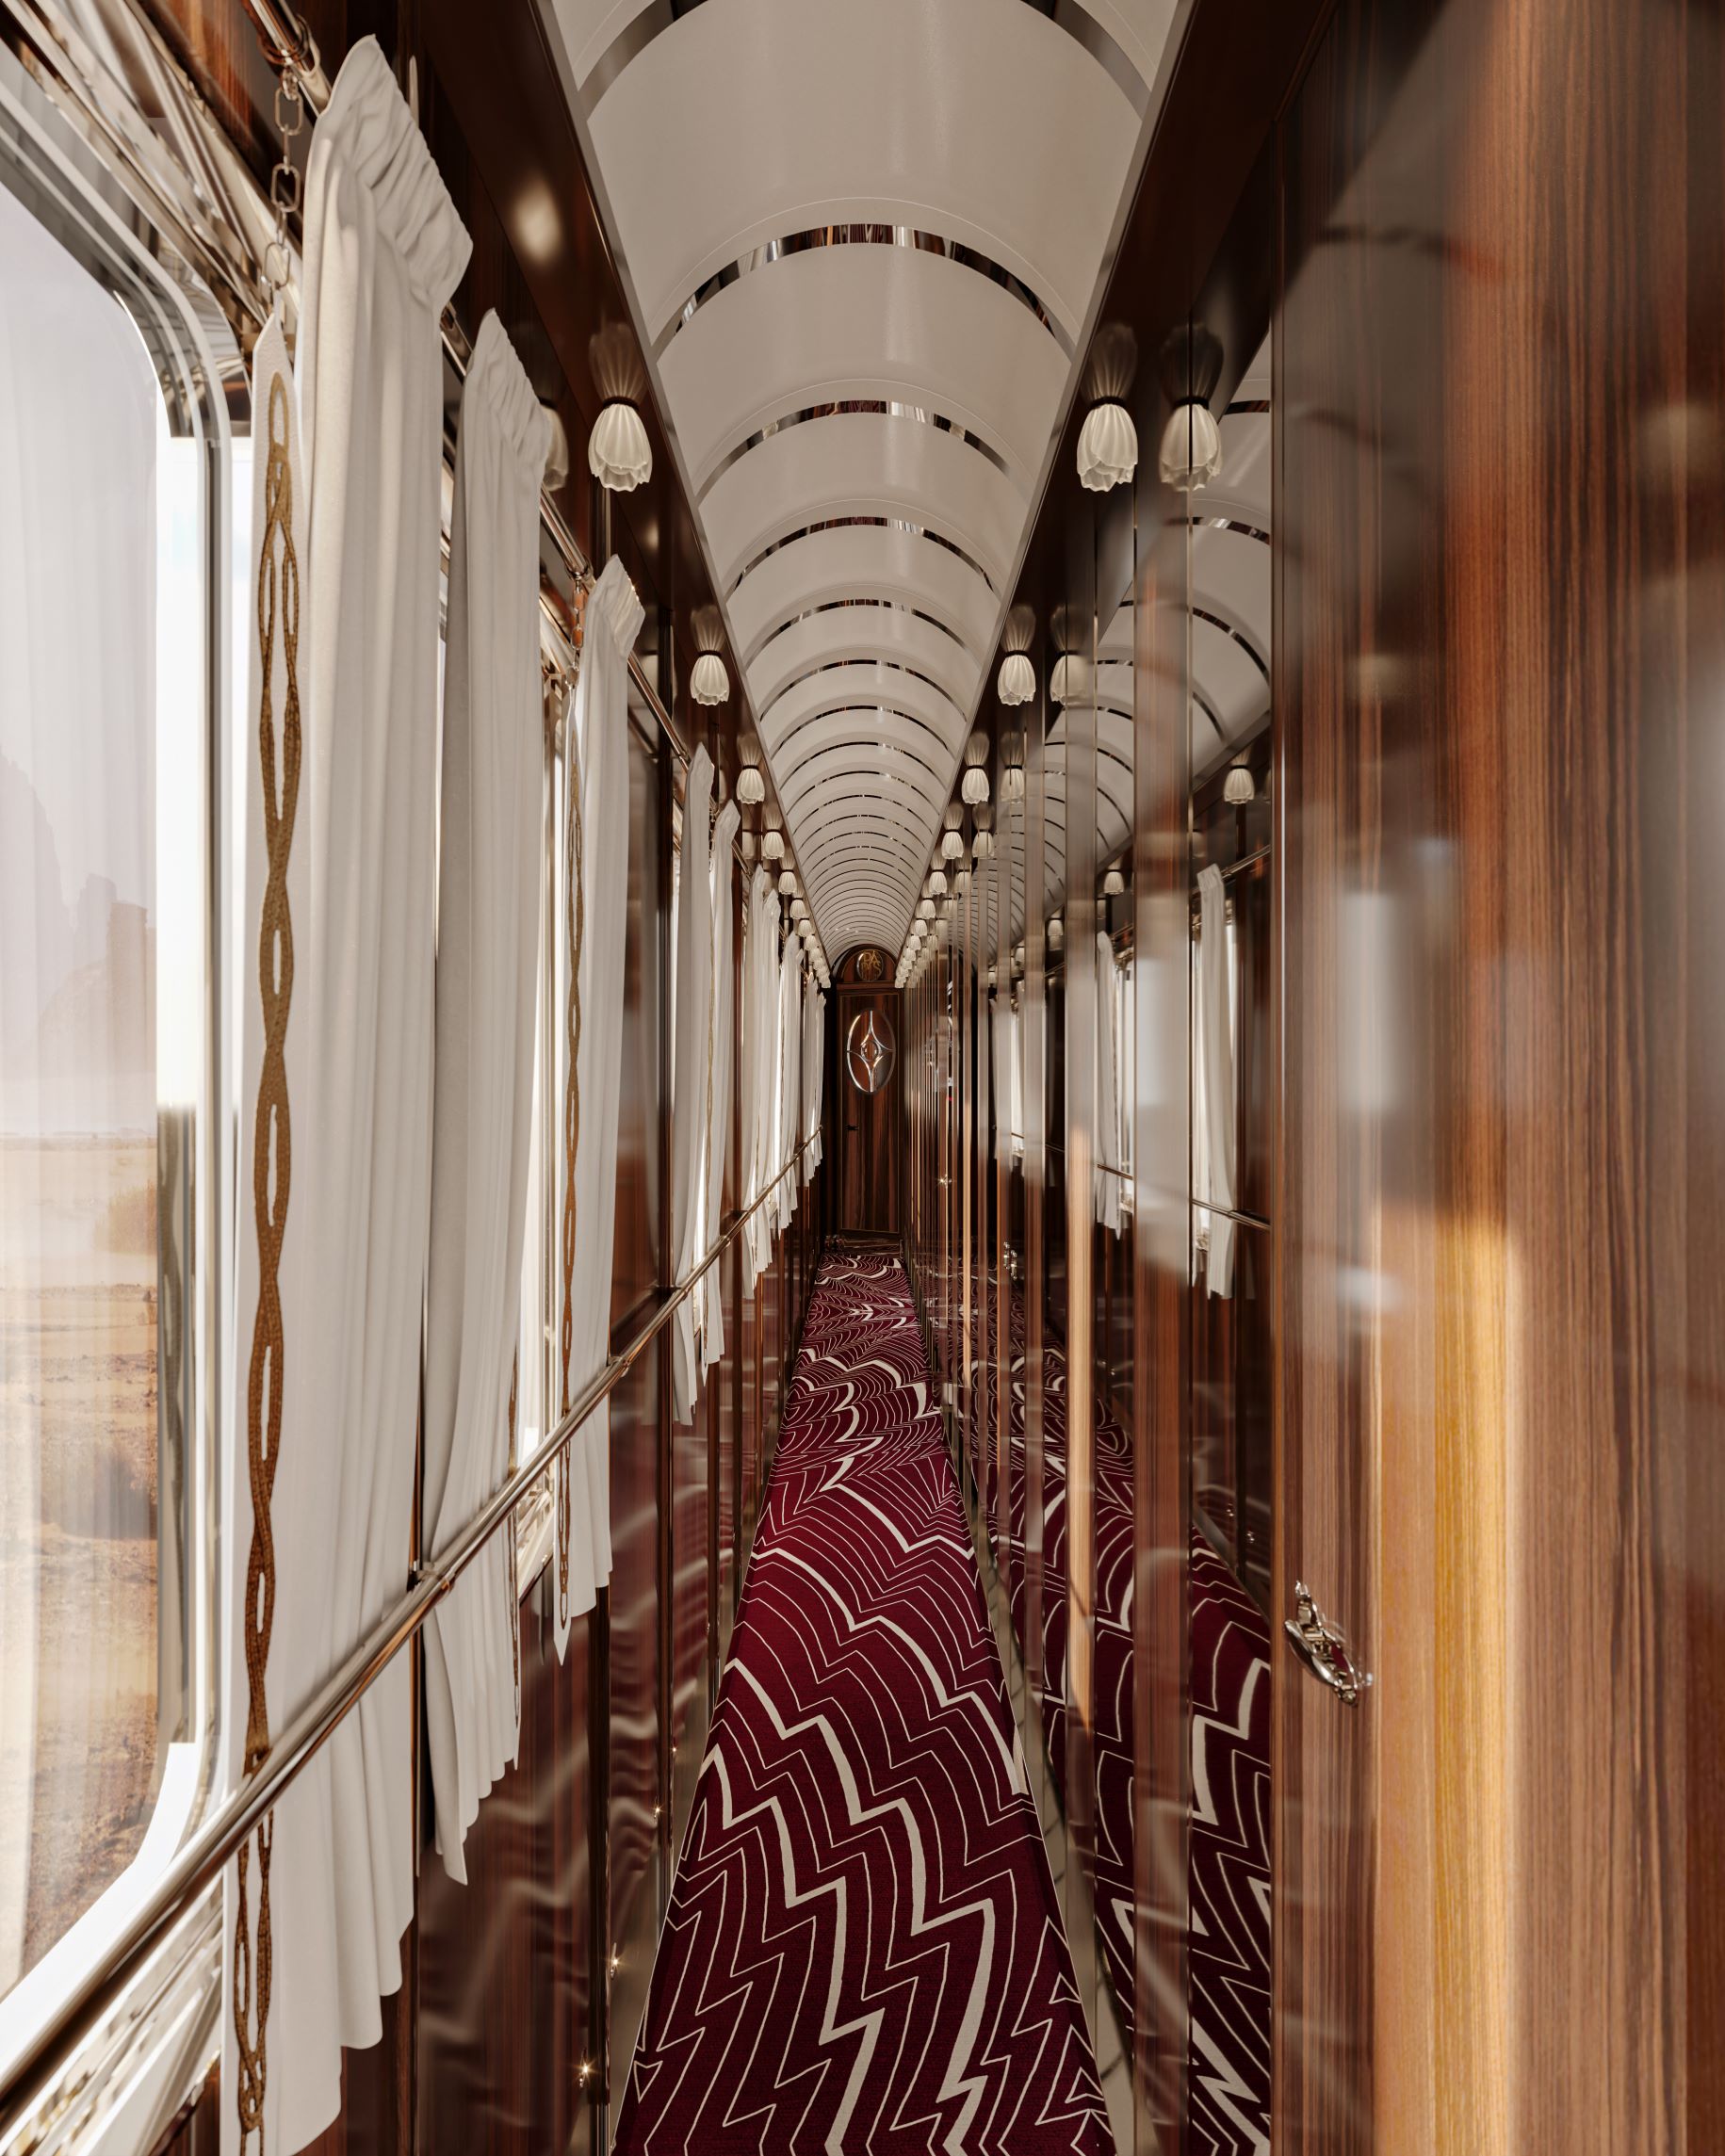  The Orient Express